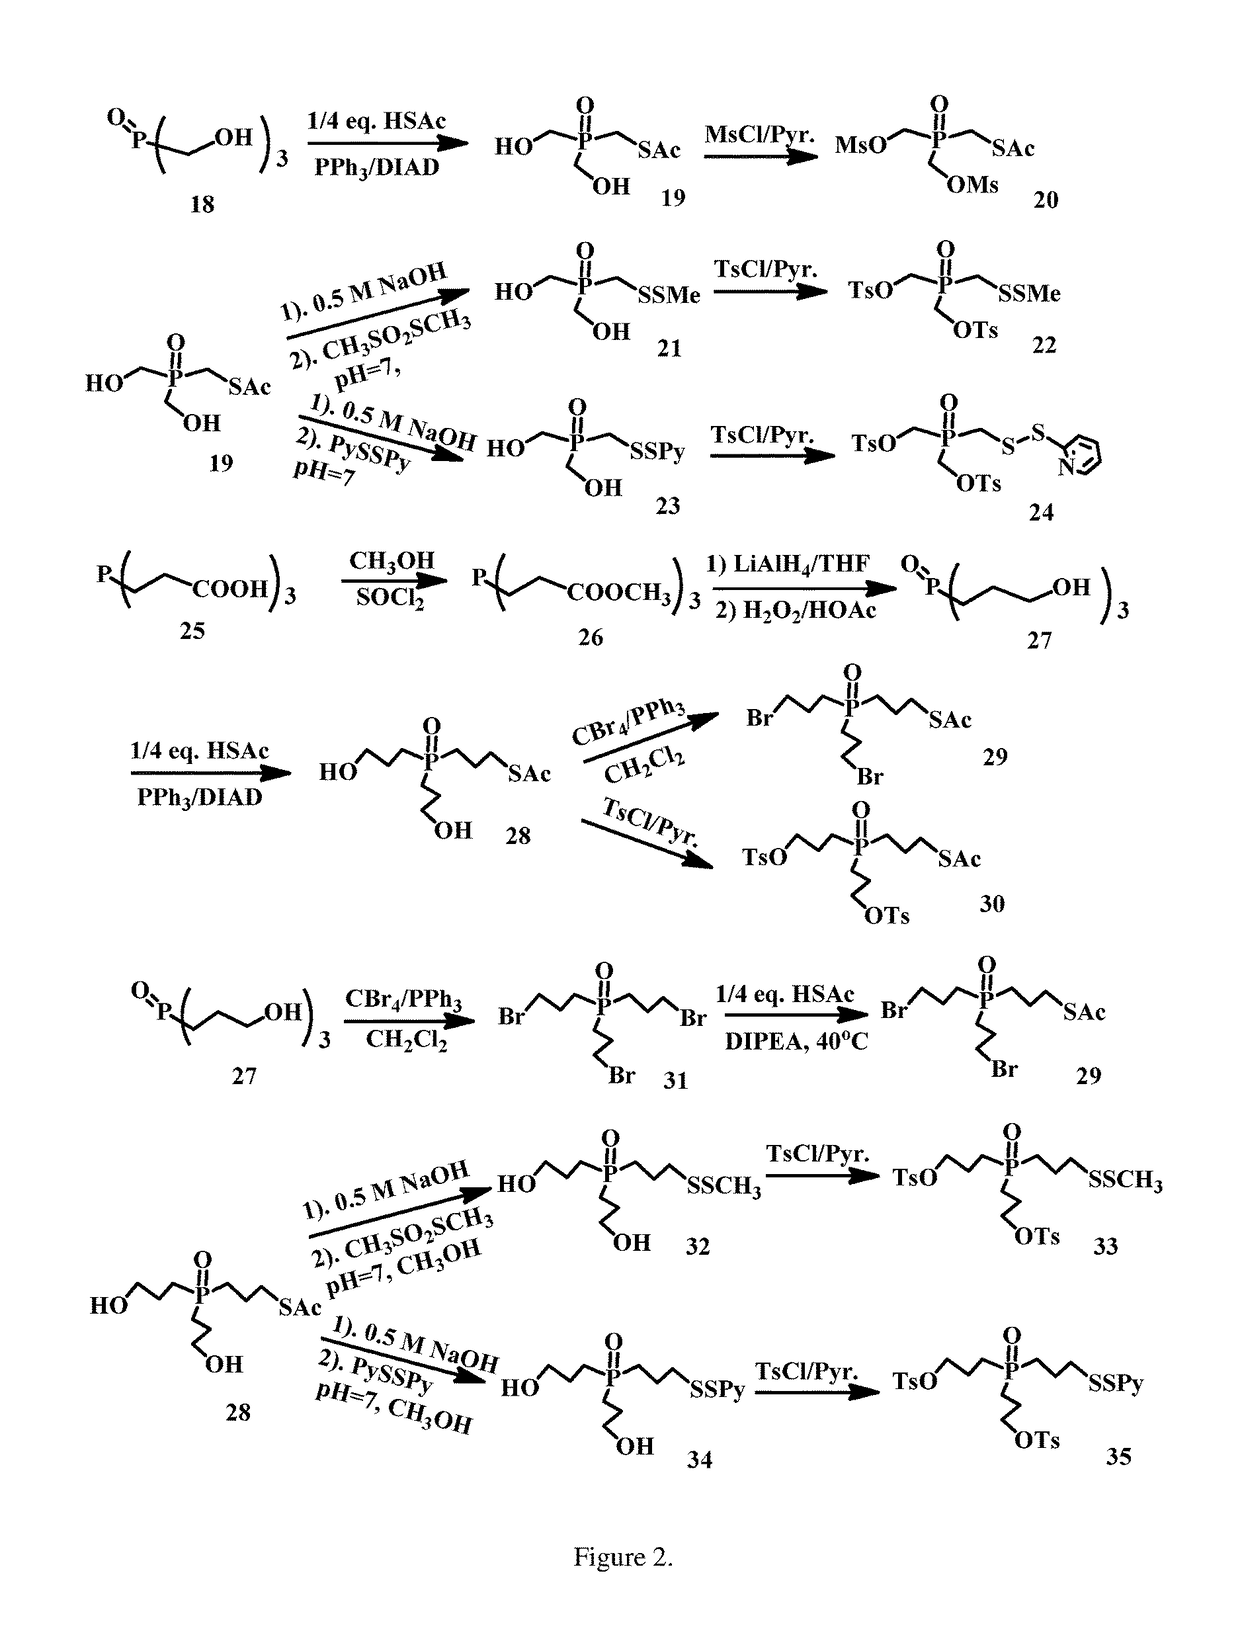 Cytotoxic agents for conjugation to a cell binding molecule